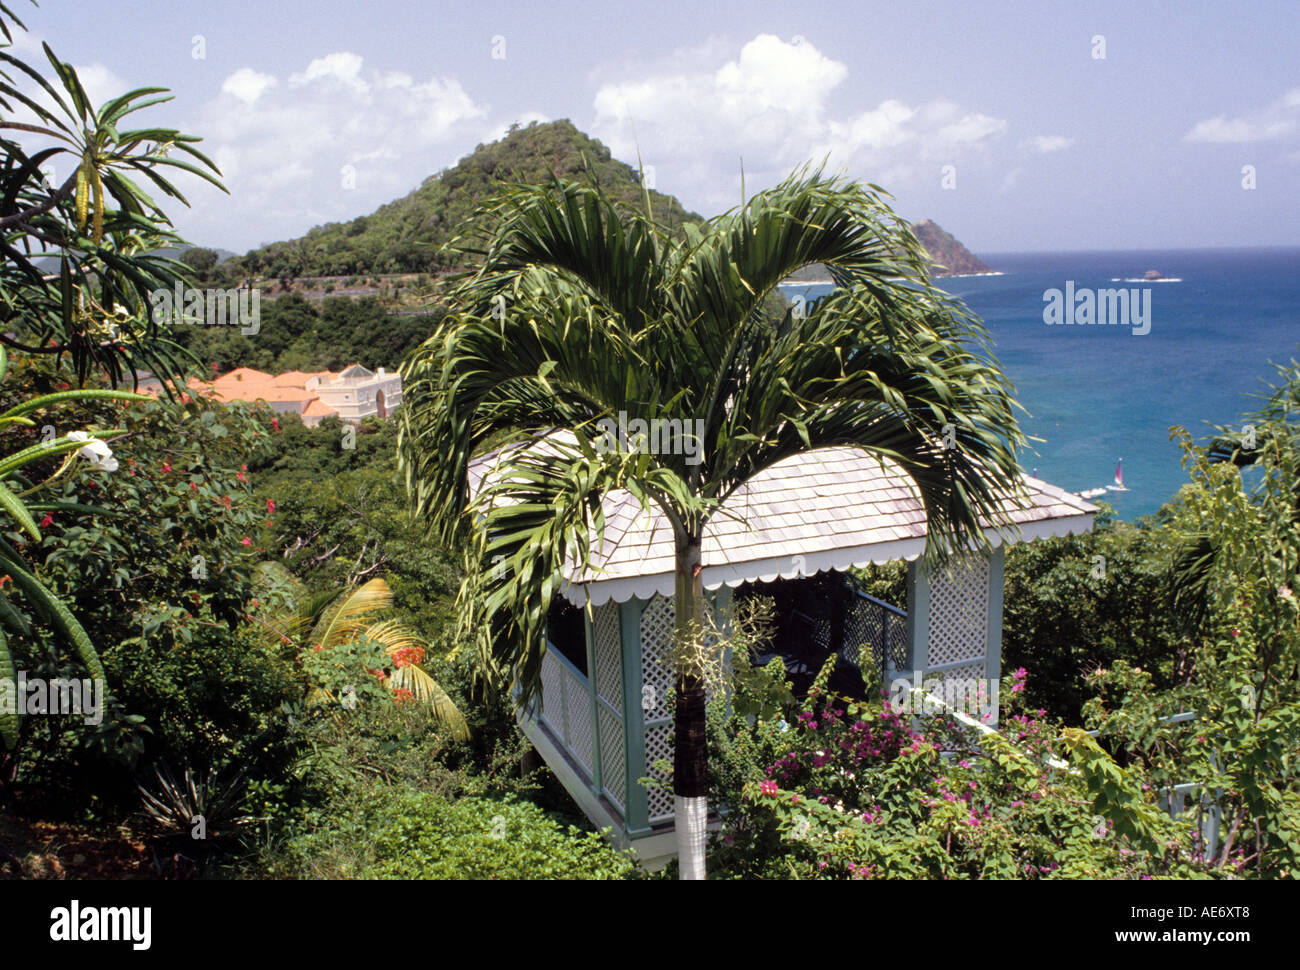 Pavilion in tropical surrounding with sea views, St Lucia Stock Photo